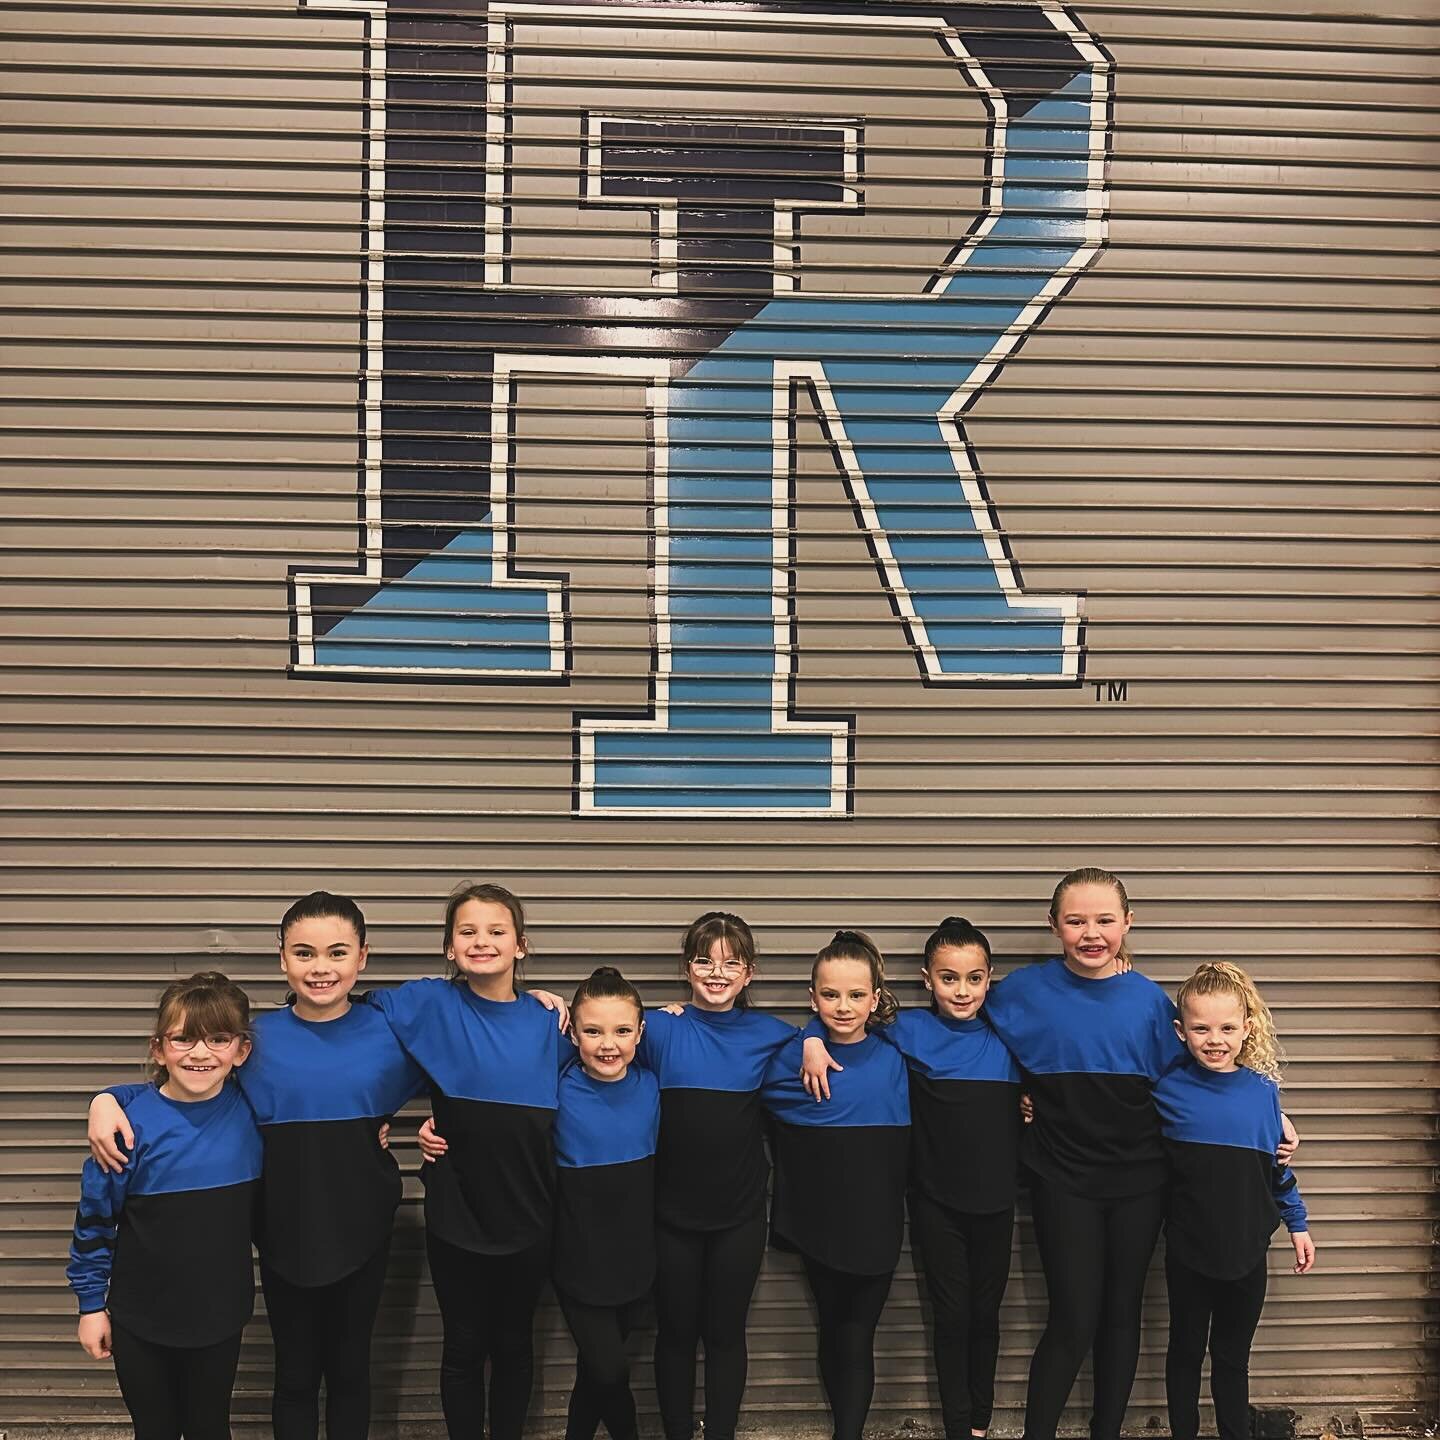 Our Little Stars ROCKED the court yesterday at the URI vs UMASS game! We love our friends and family so much for coming out to support us!!! Such a great day and an awesome Rhody win!!!